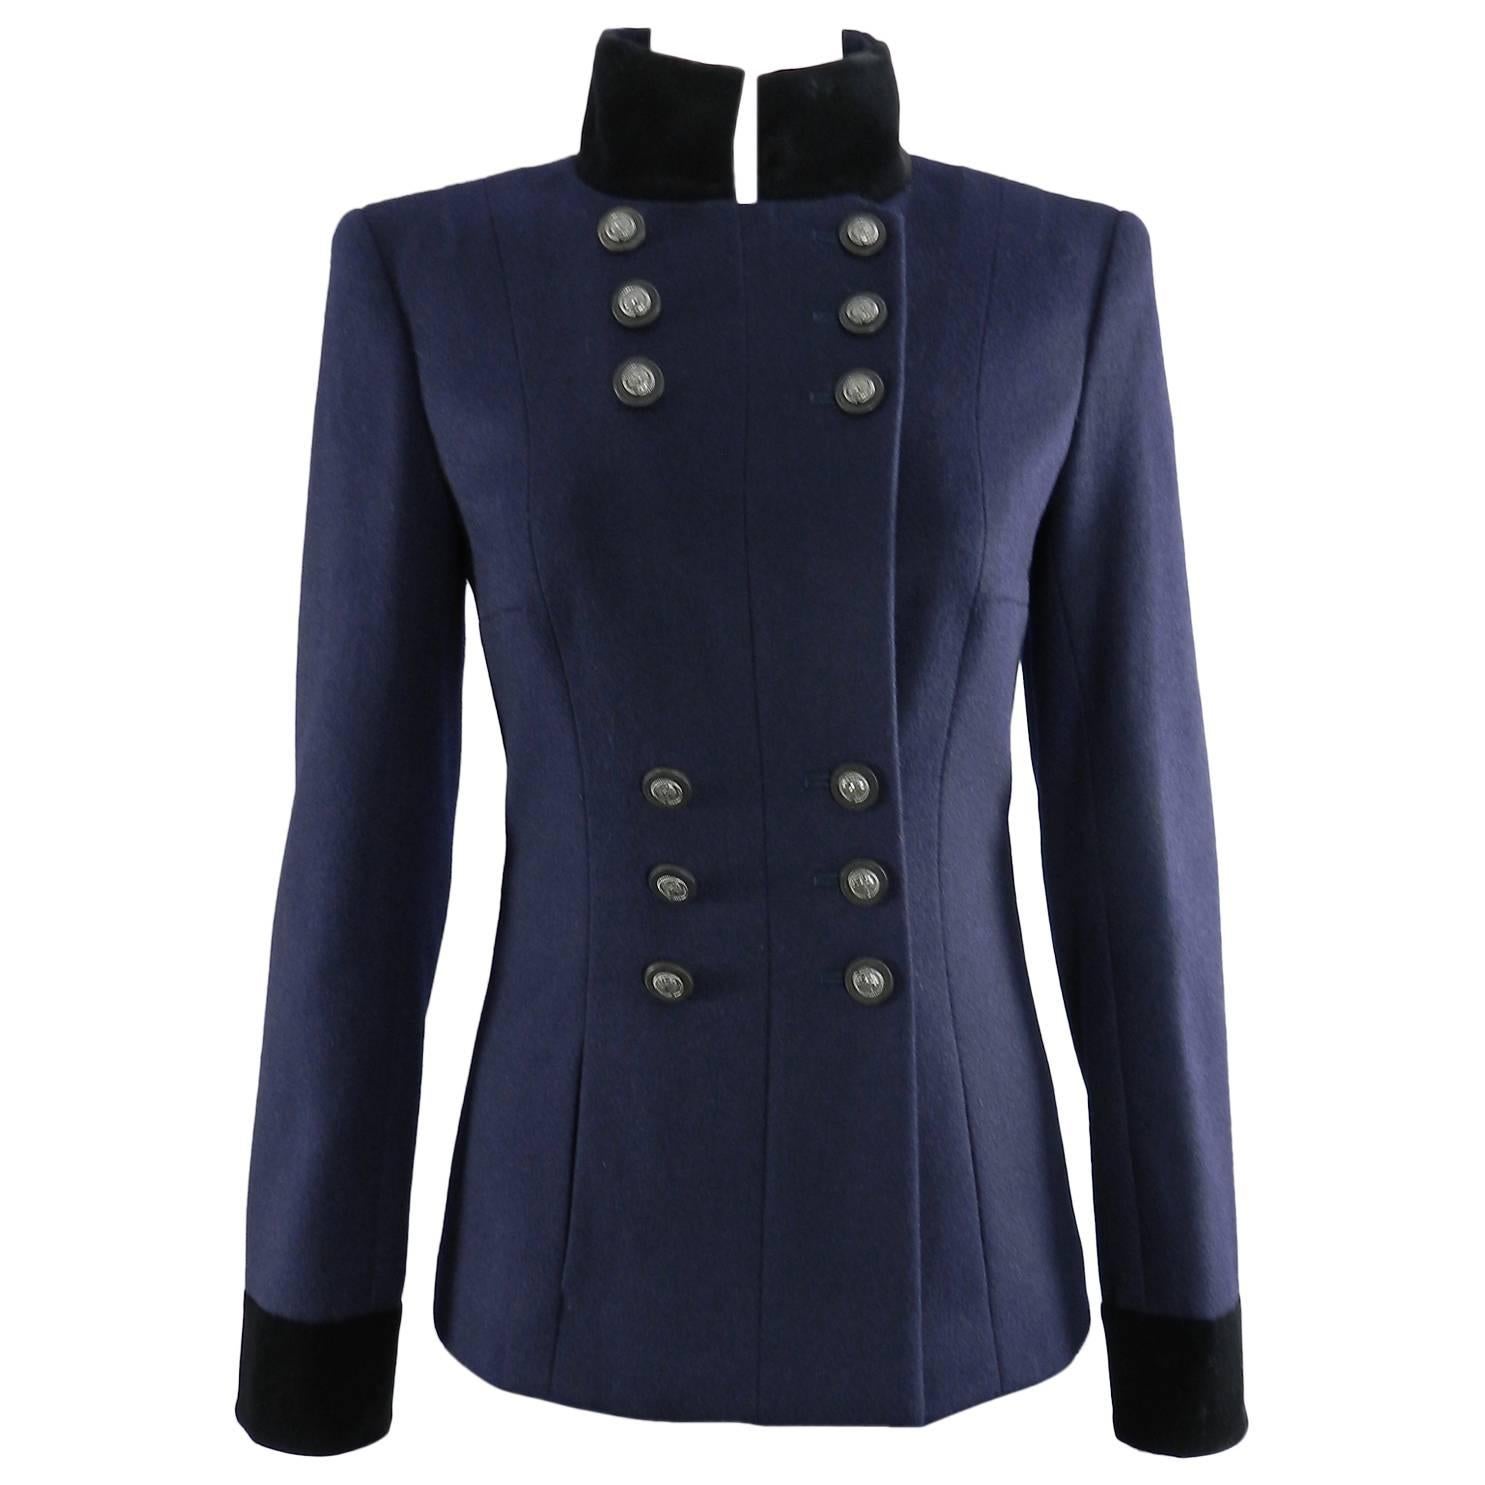 Chanel 2014 pre-fall paris dallas runway collection navy wool Military Jacket